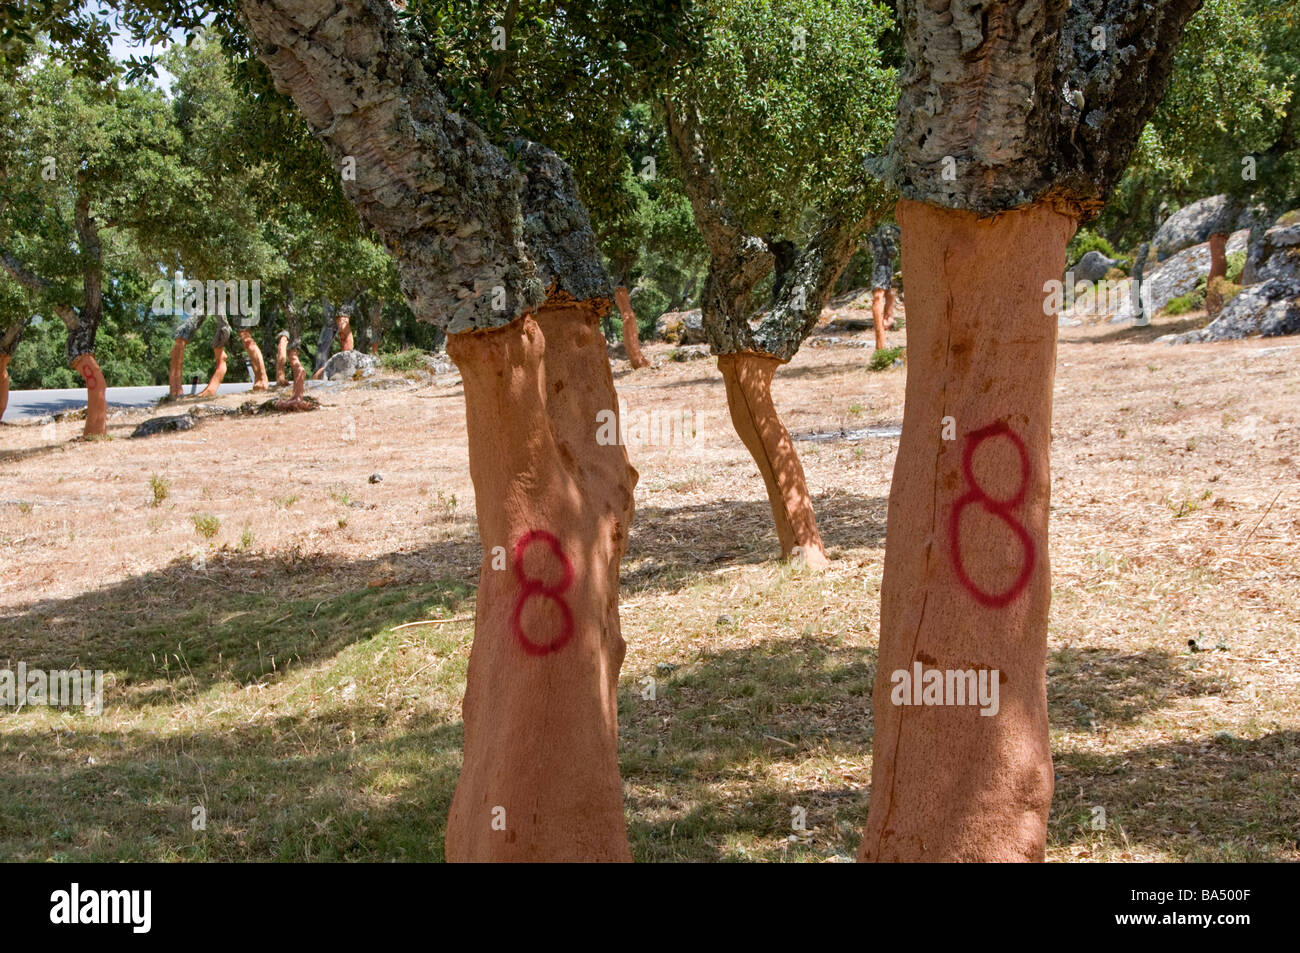 Newly harvested Cork Oak bark (Quercus suber) Number 8 indicates year of harvest 2008 Stock Photo